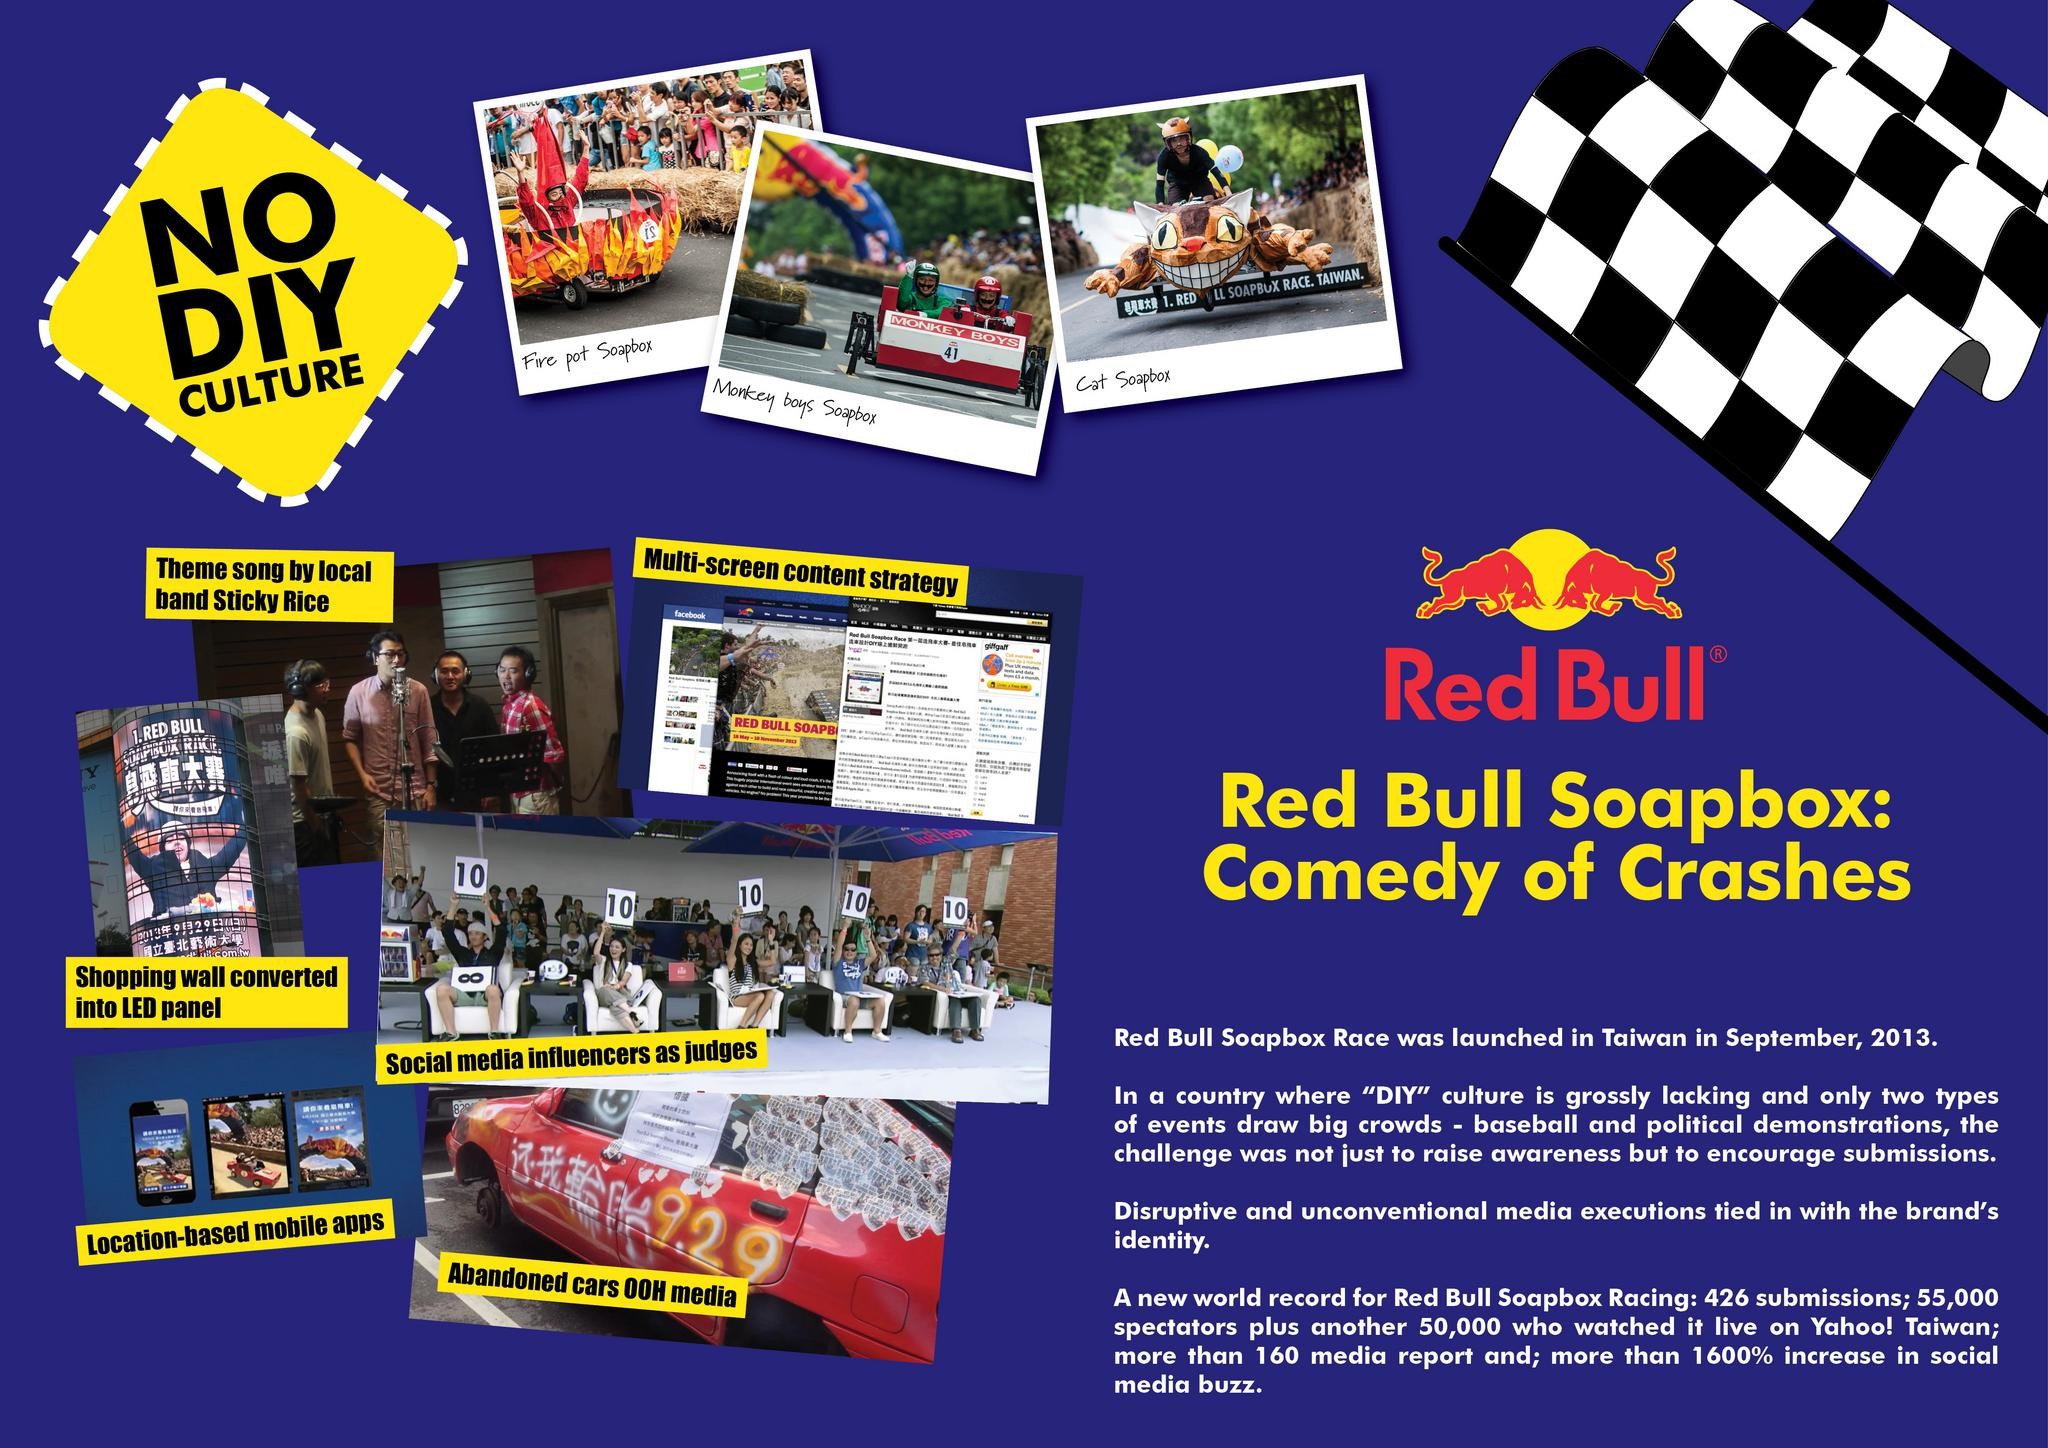 RED BULL SOAPBOX RACE BRINGS ITS COMEDY OF CRASHES TO TAIWAN